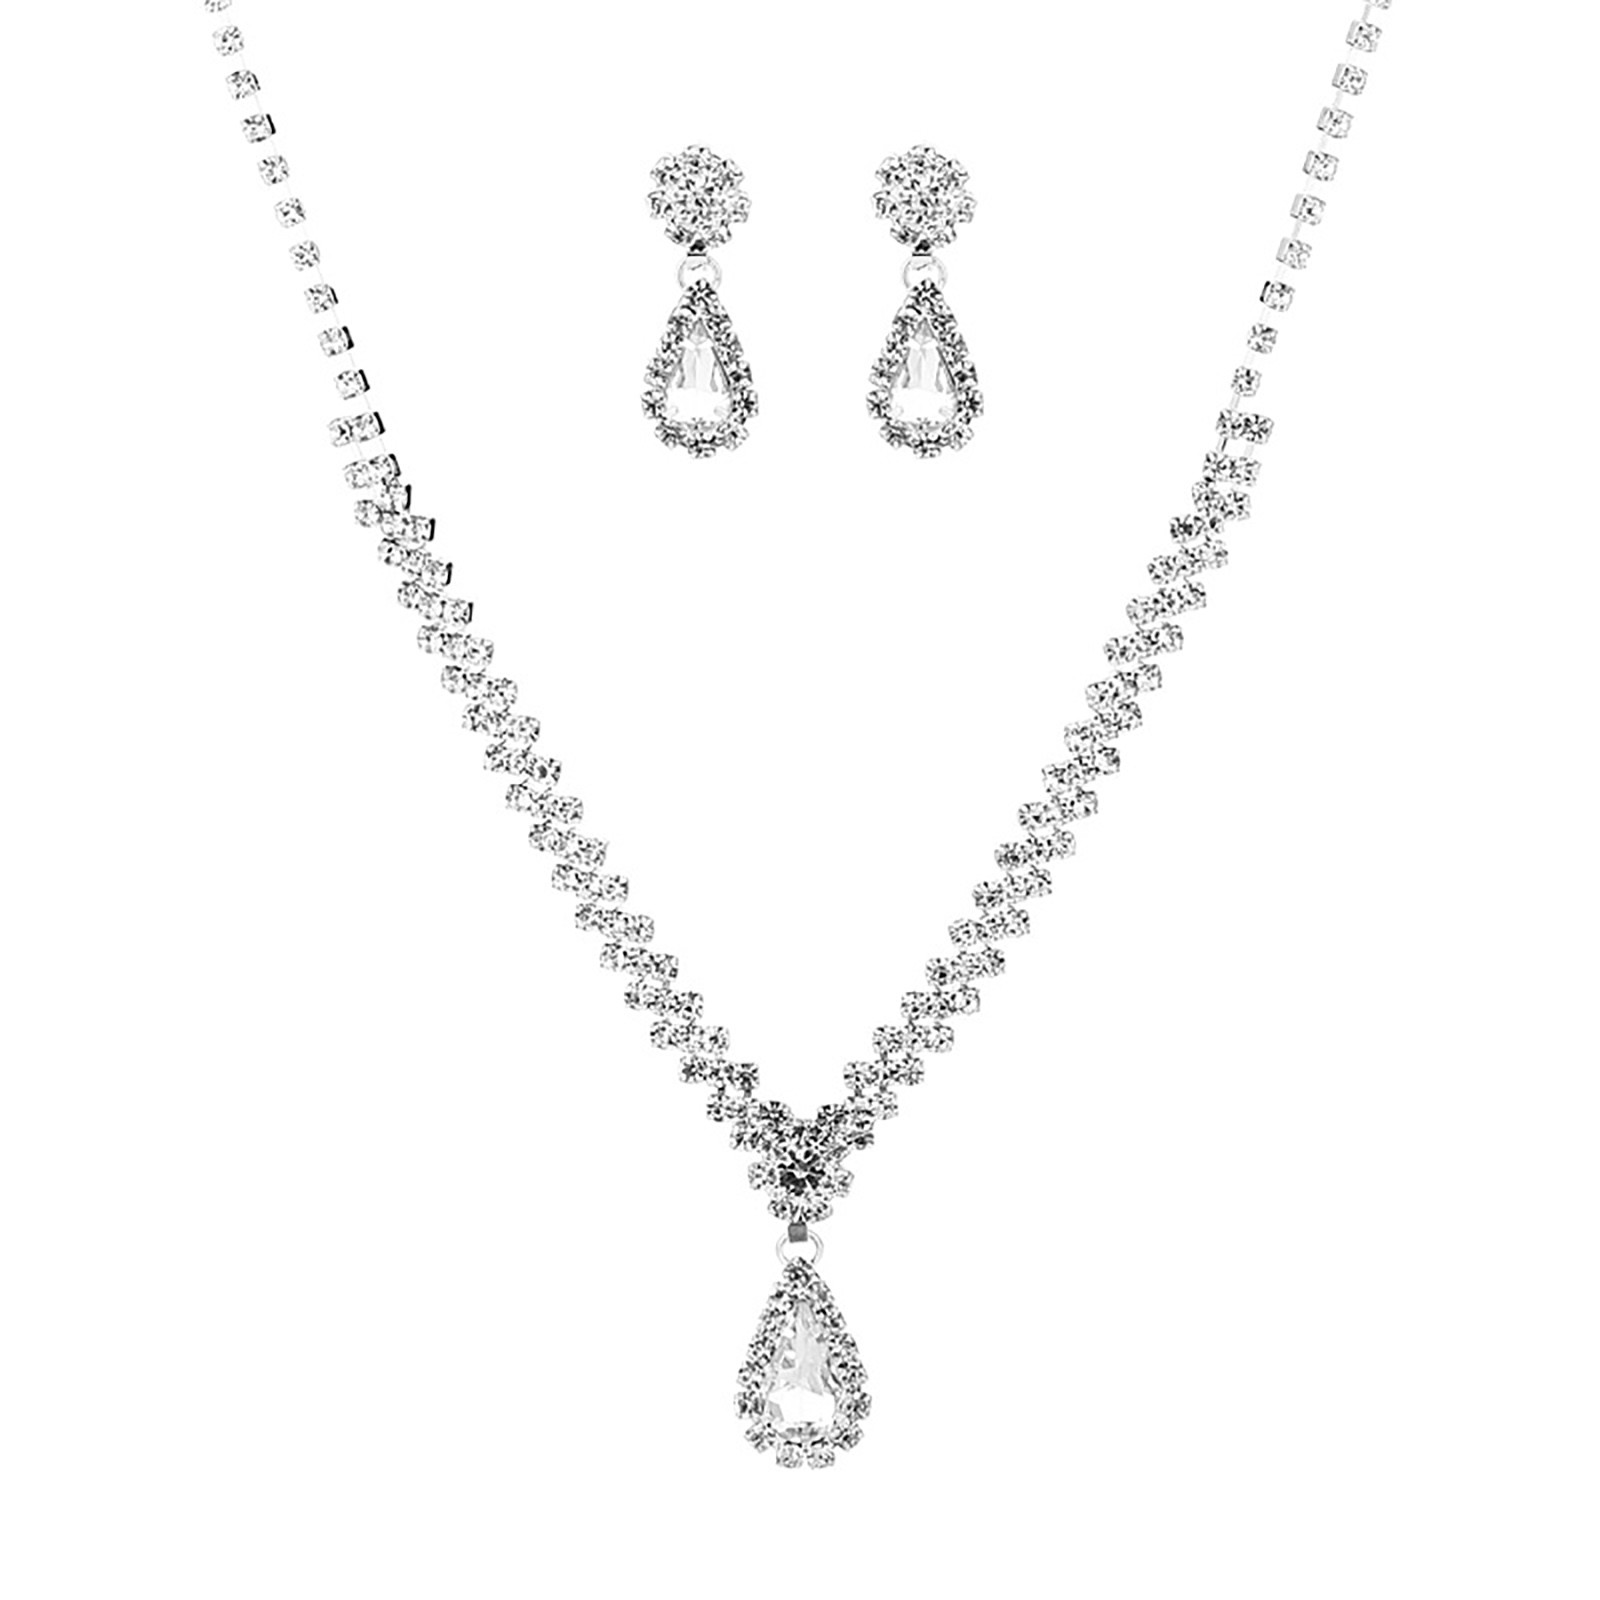 TIHLMK Deals Clearance Initial Necklaces for Women Exquisite Rhinestone Chain Necklace Set Diamond Necklace and Earrings Two-piece Wedding Bridal Jewelry Set - image 2 of 5